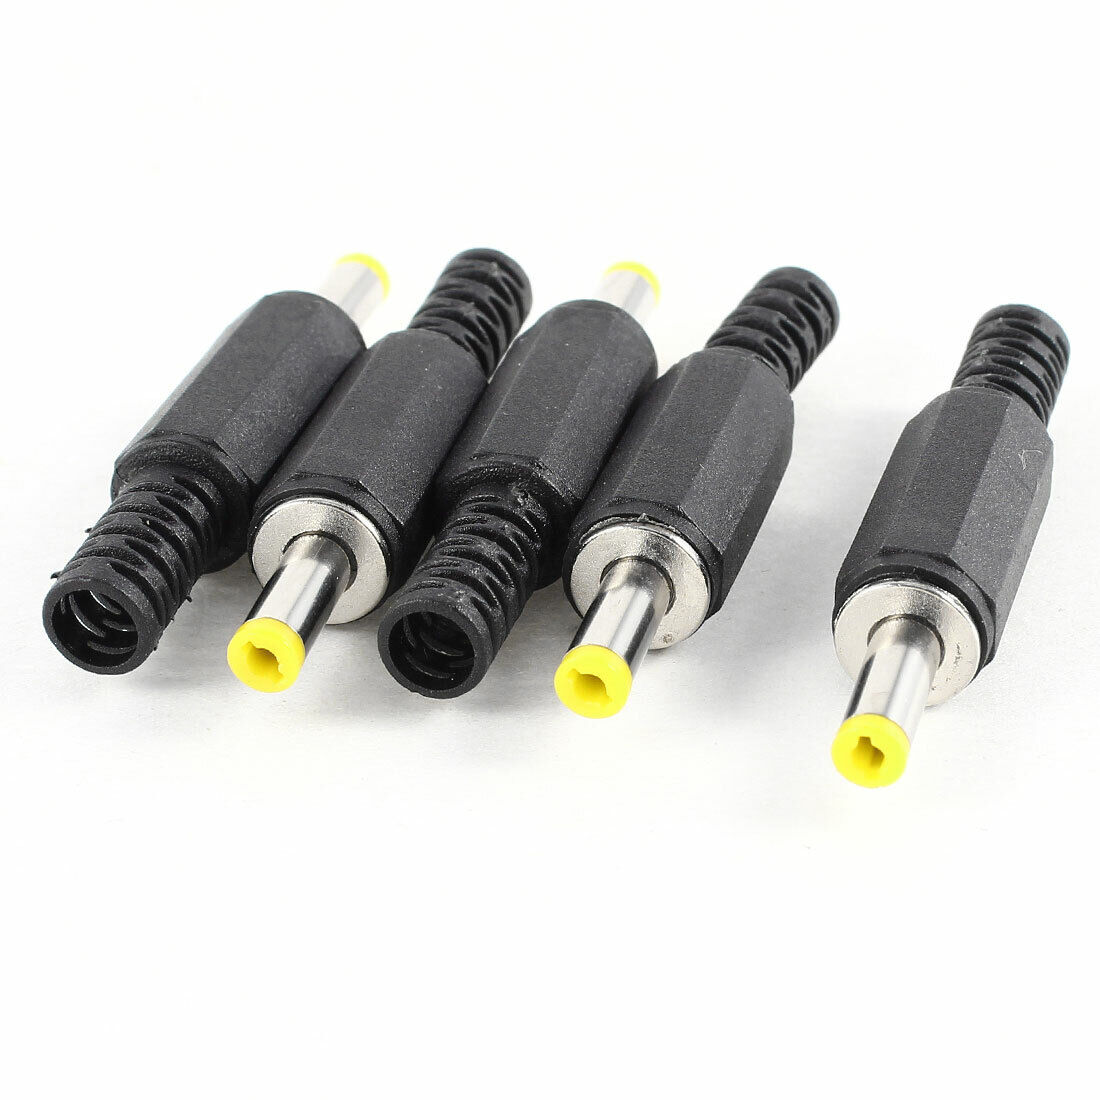 5 Pcs DC Cable Jack Power Supply Male Connector 5mm x 2.5mm